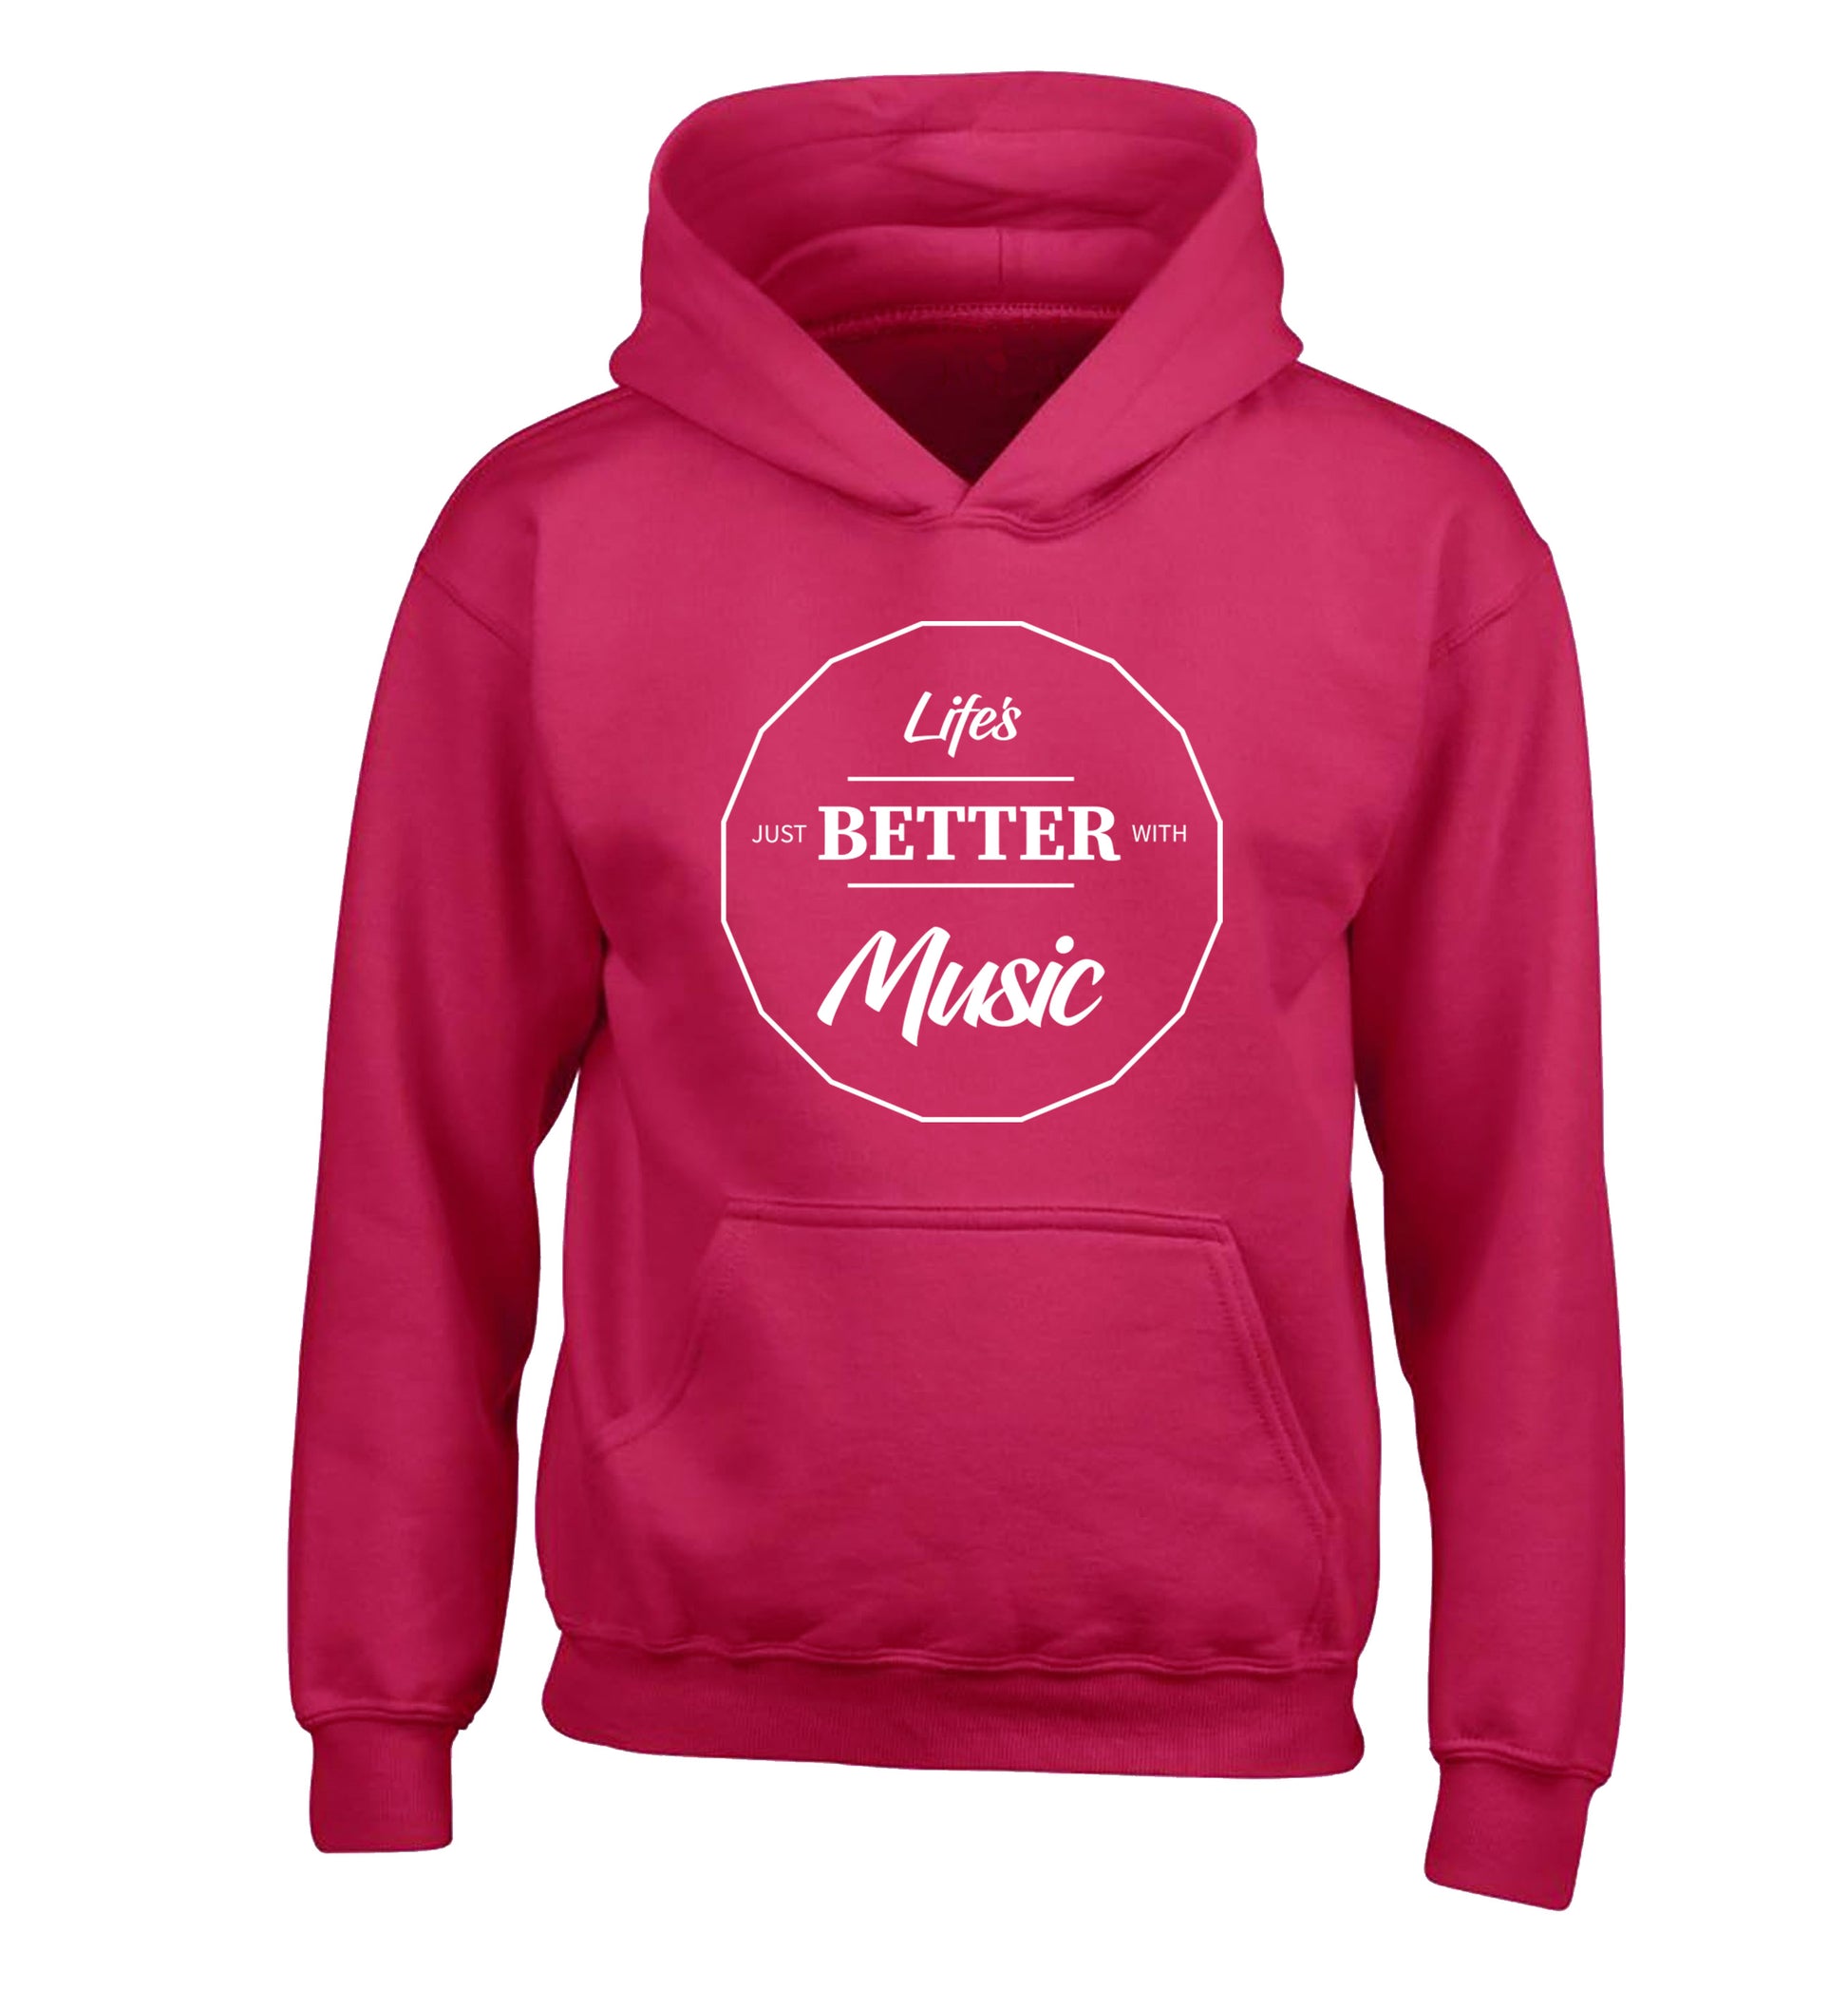 Life is Better With Music children's pink hoodie 12-13 Years